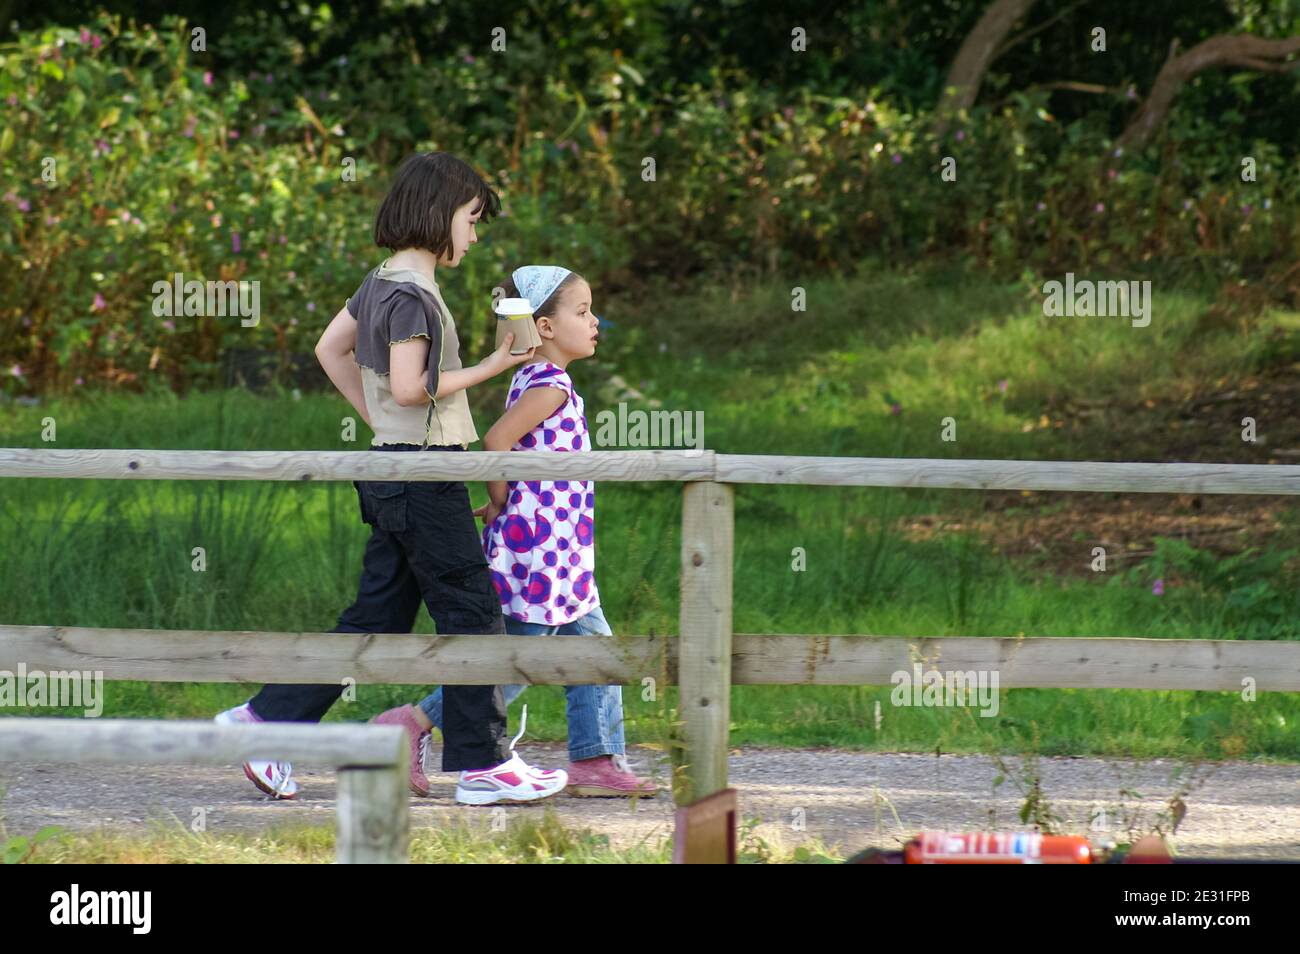 Two young girls walking along a boardwalk by a river, UK, one carrying a hot drink in a disposable cup Stock Photo